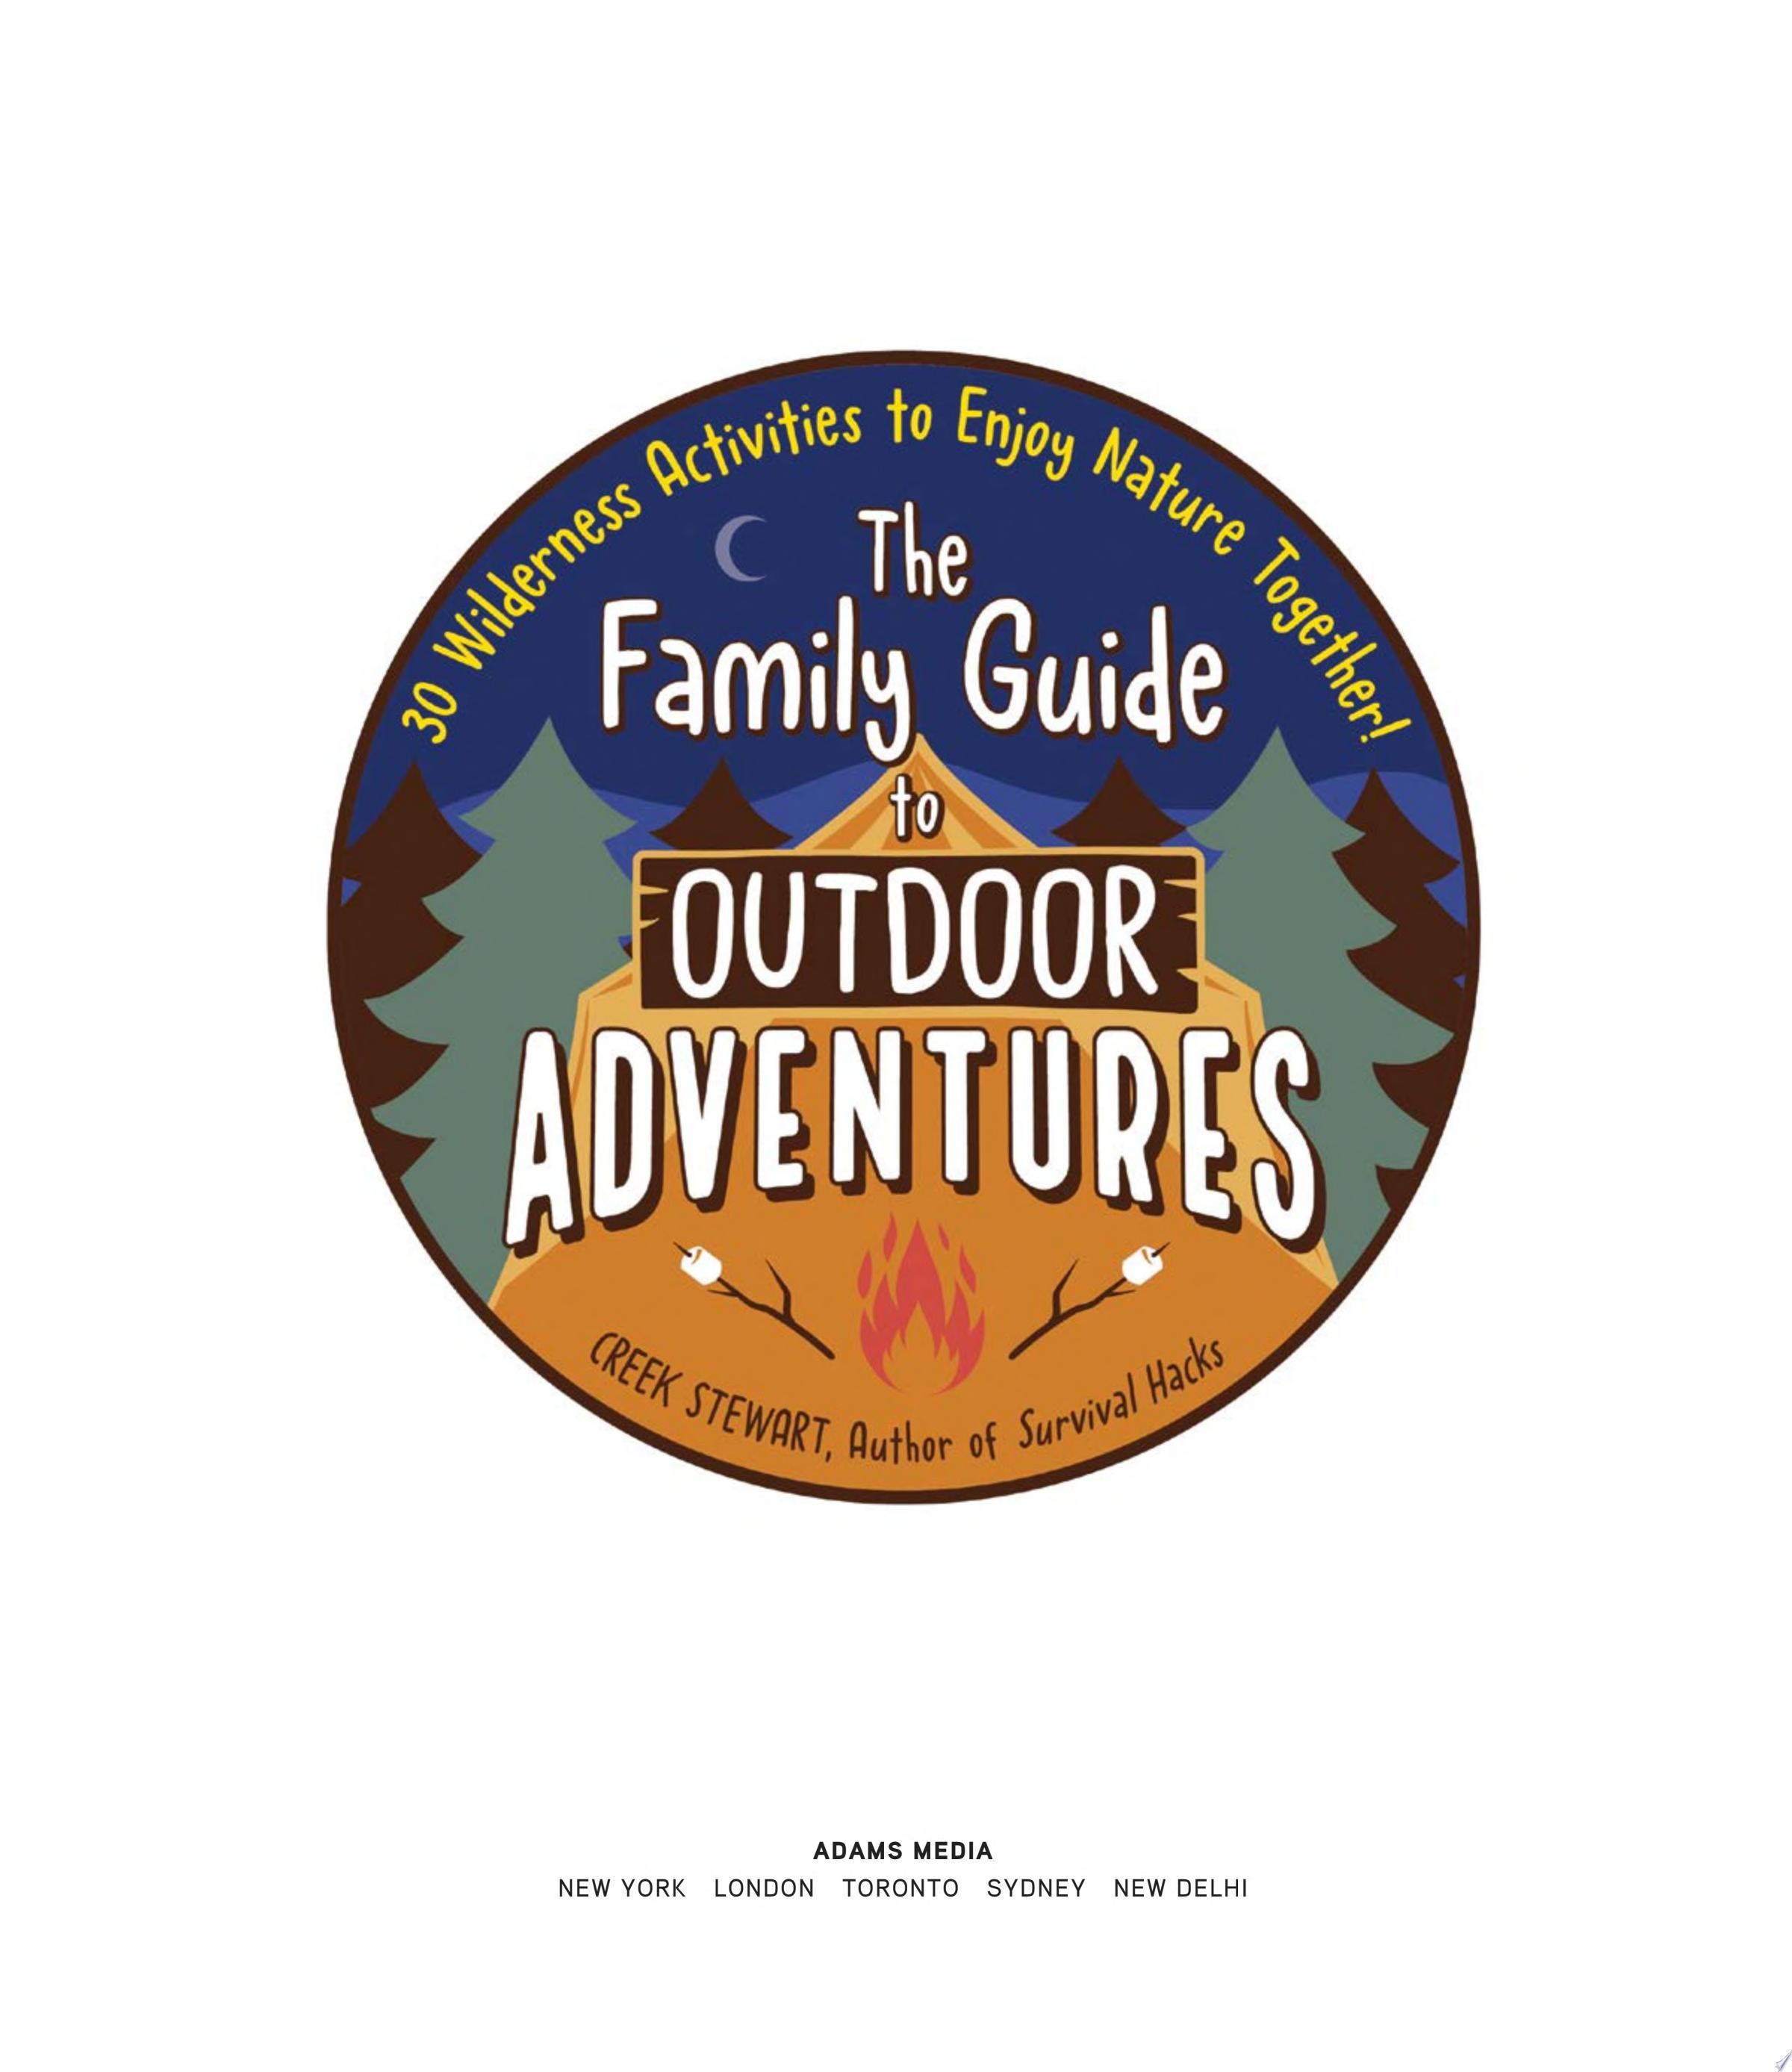 Image for "The Family Guide to Outdoor Adventures"